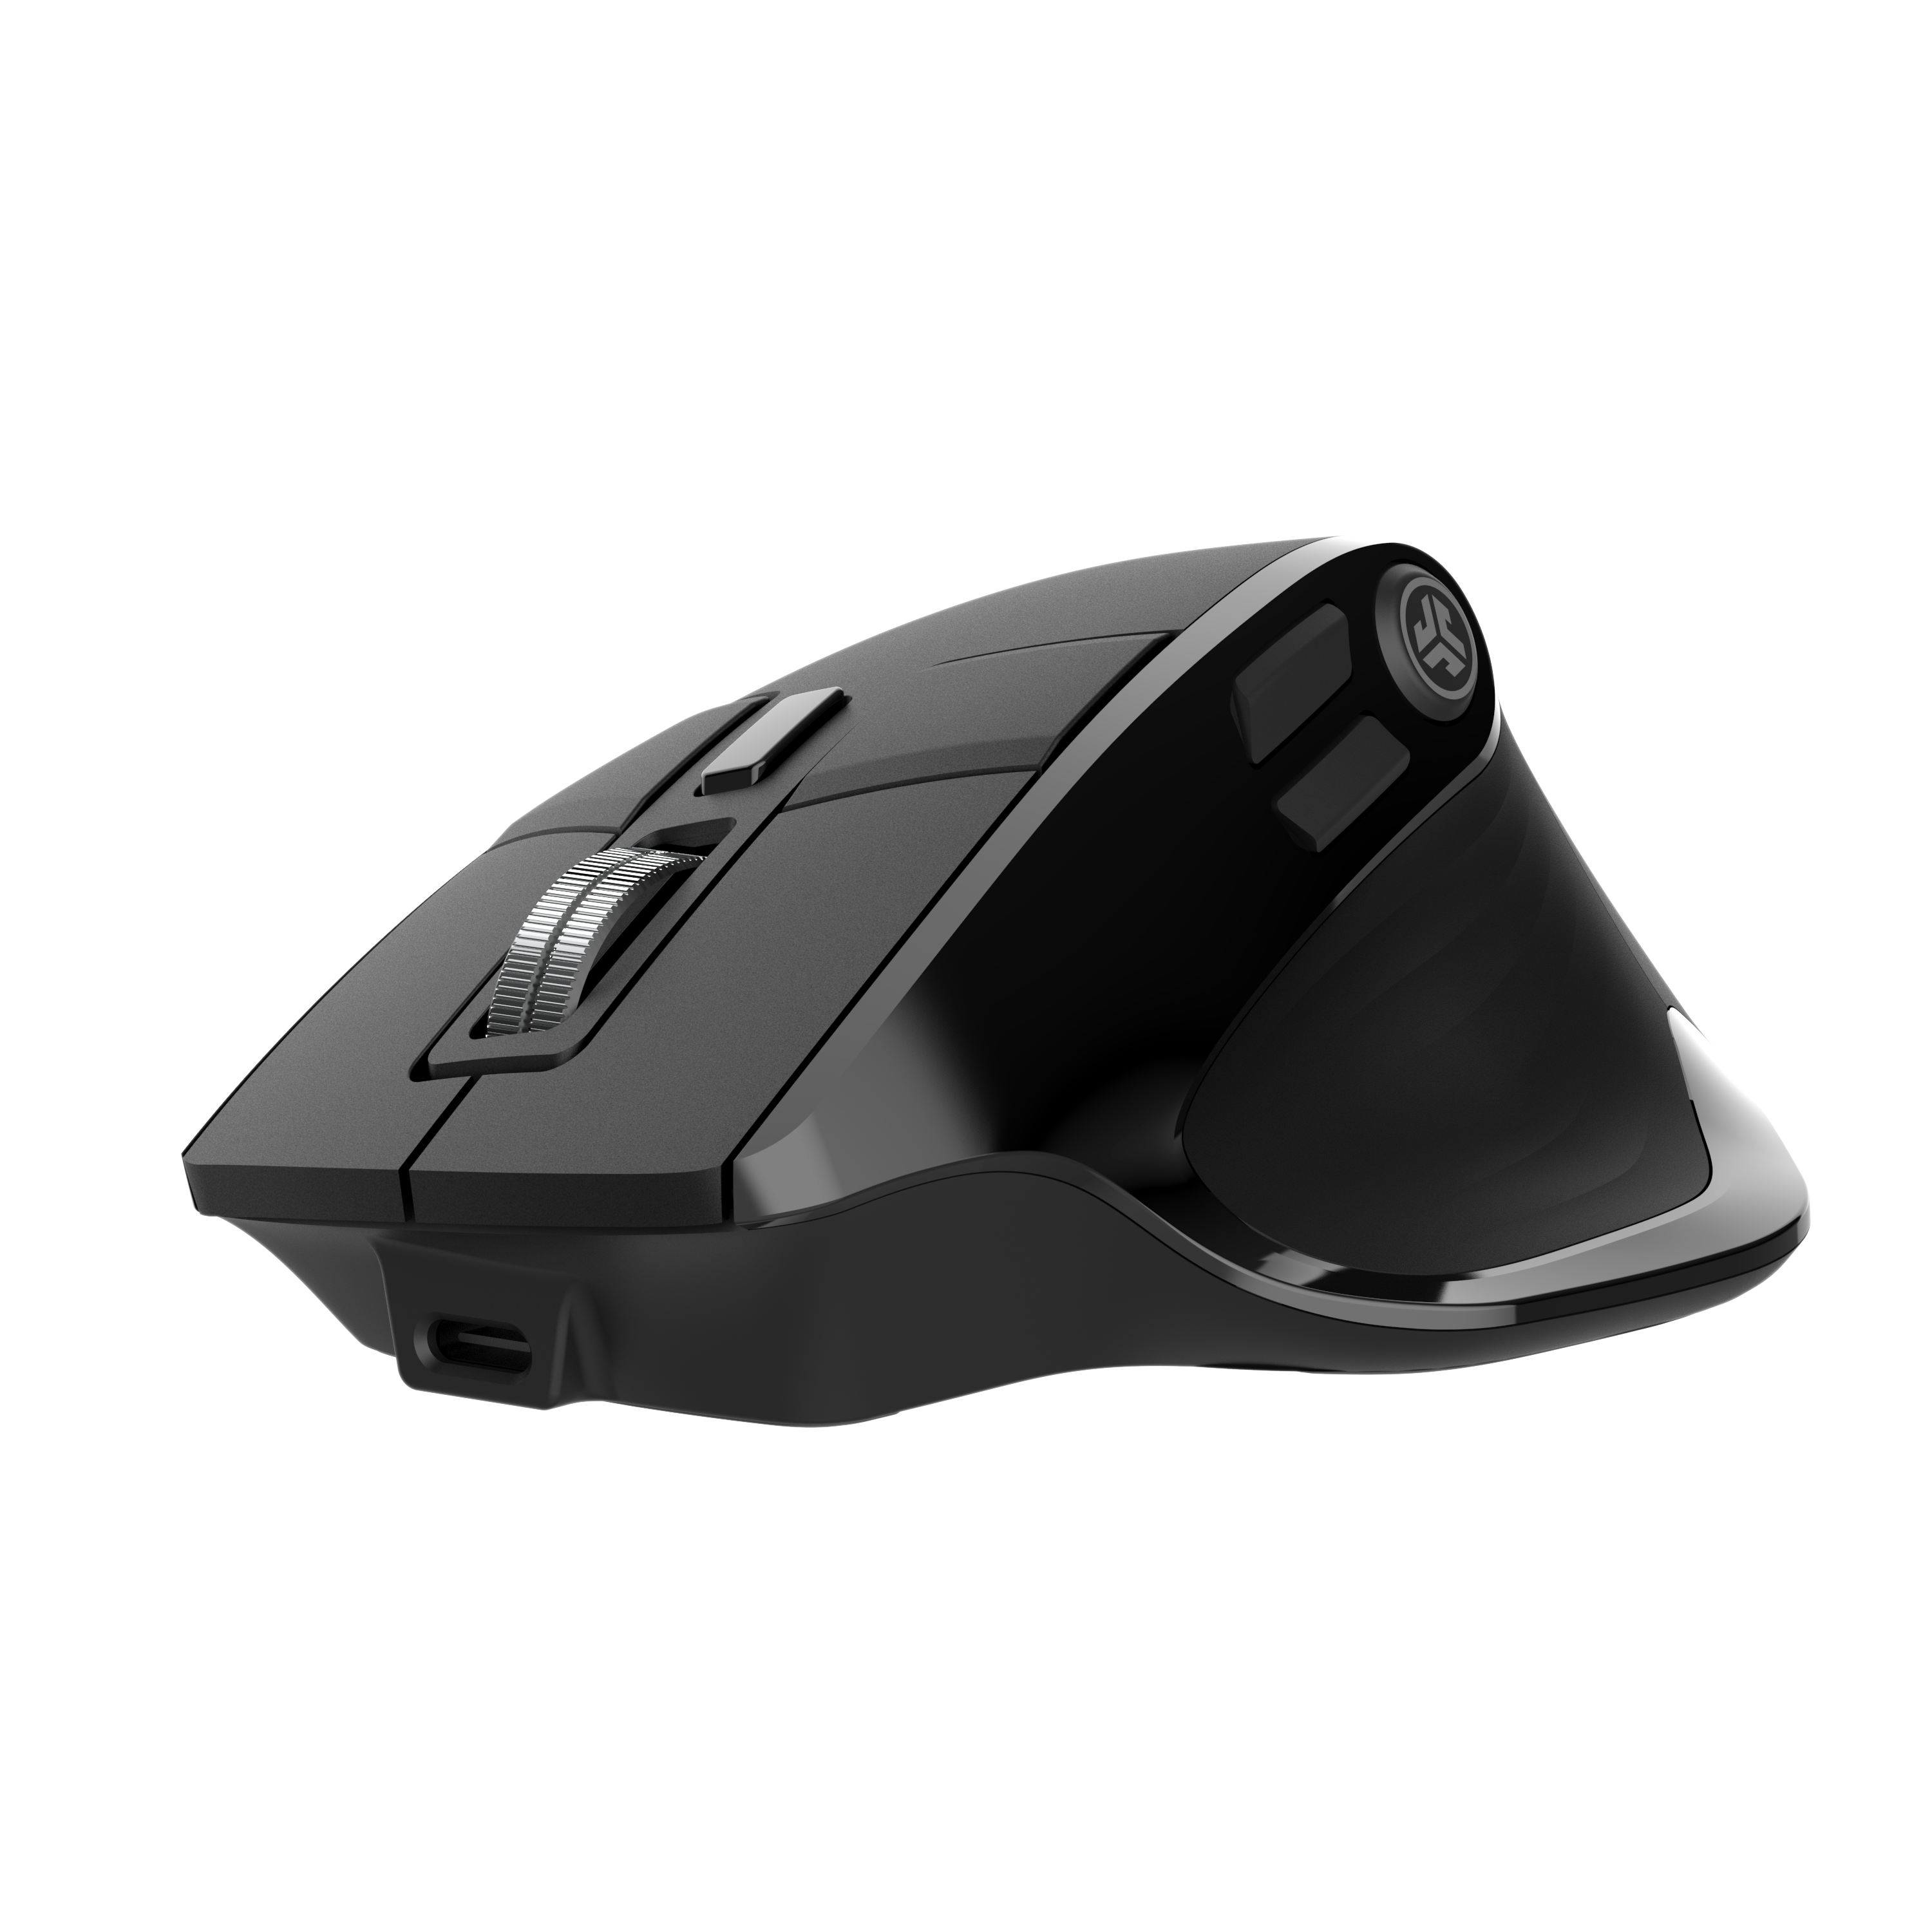 Microsoft Bluetooth Mouse - Black. Comfortable design, Right/Left Hand Use,  4-Way Scroll Wheel, Wireless Bluetooth Mouse for PC/Laptop/Desktop, works